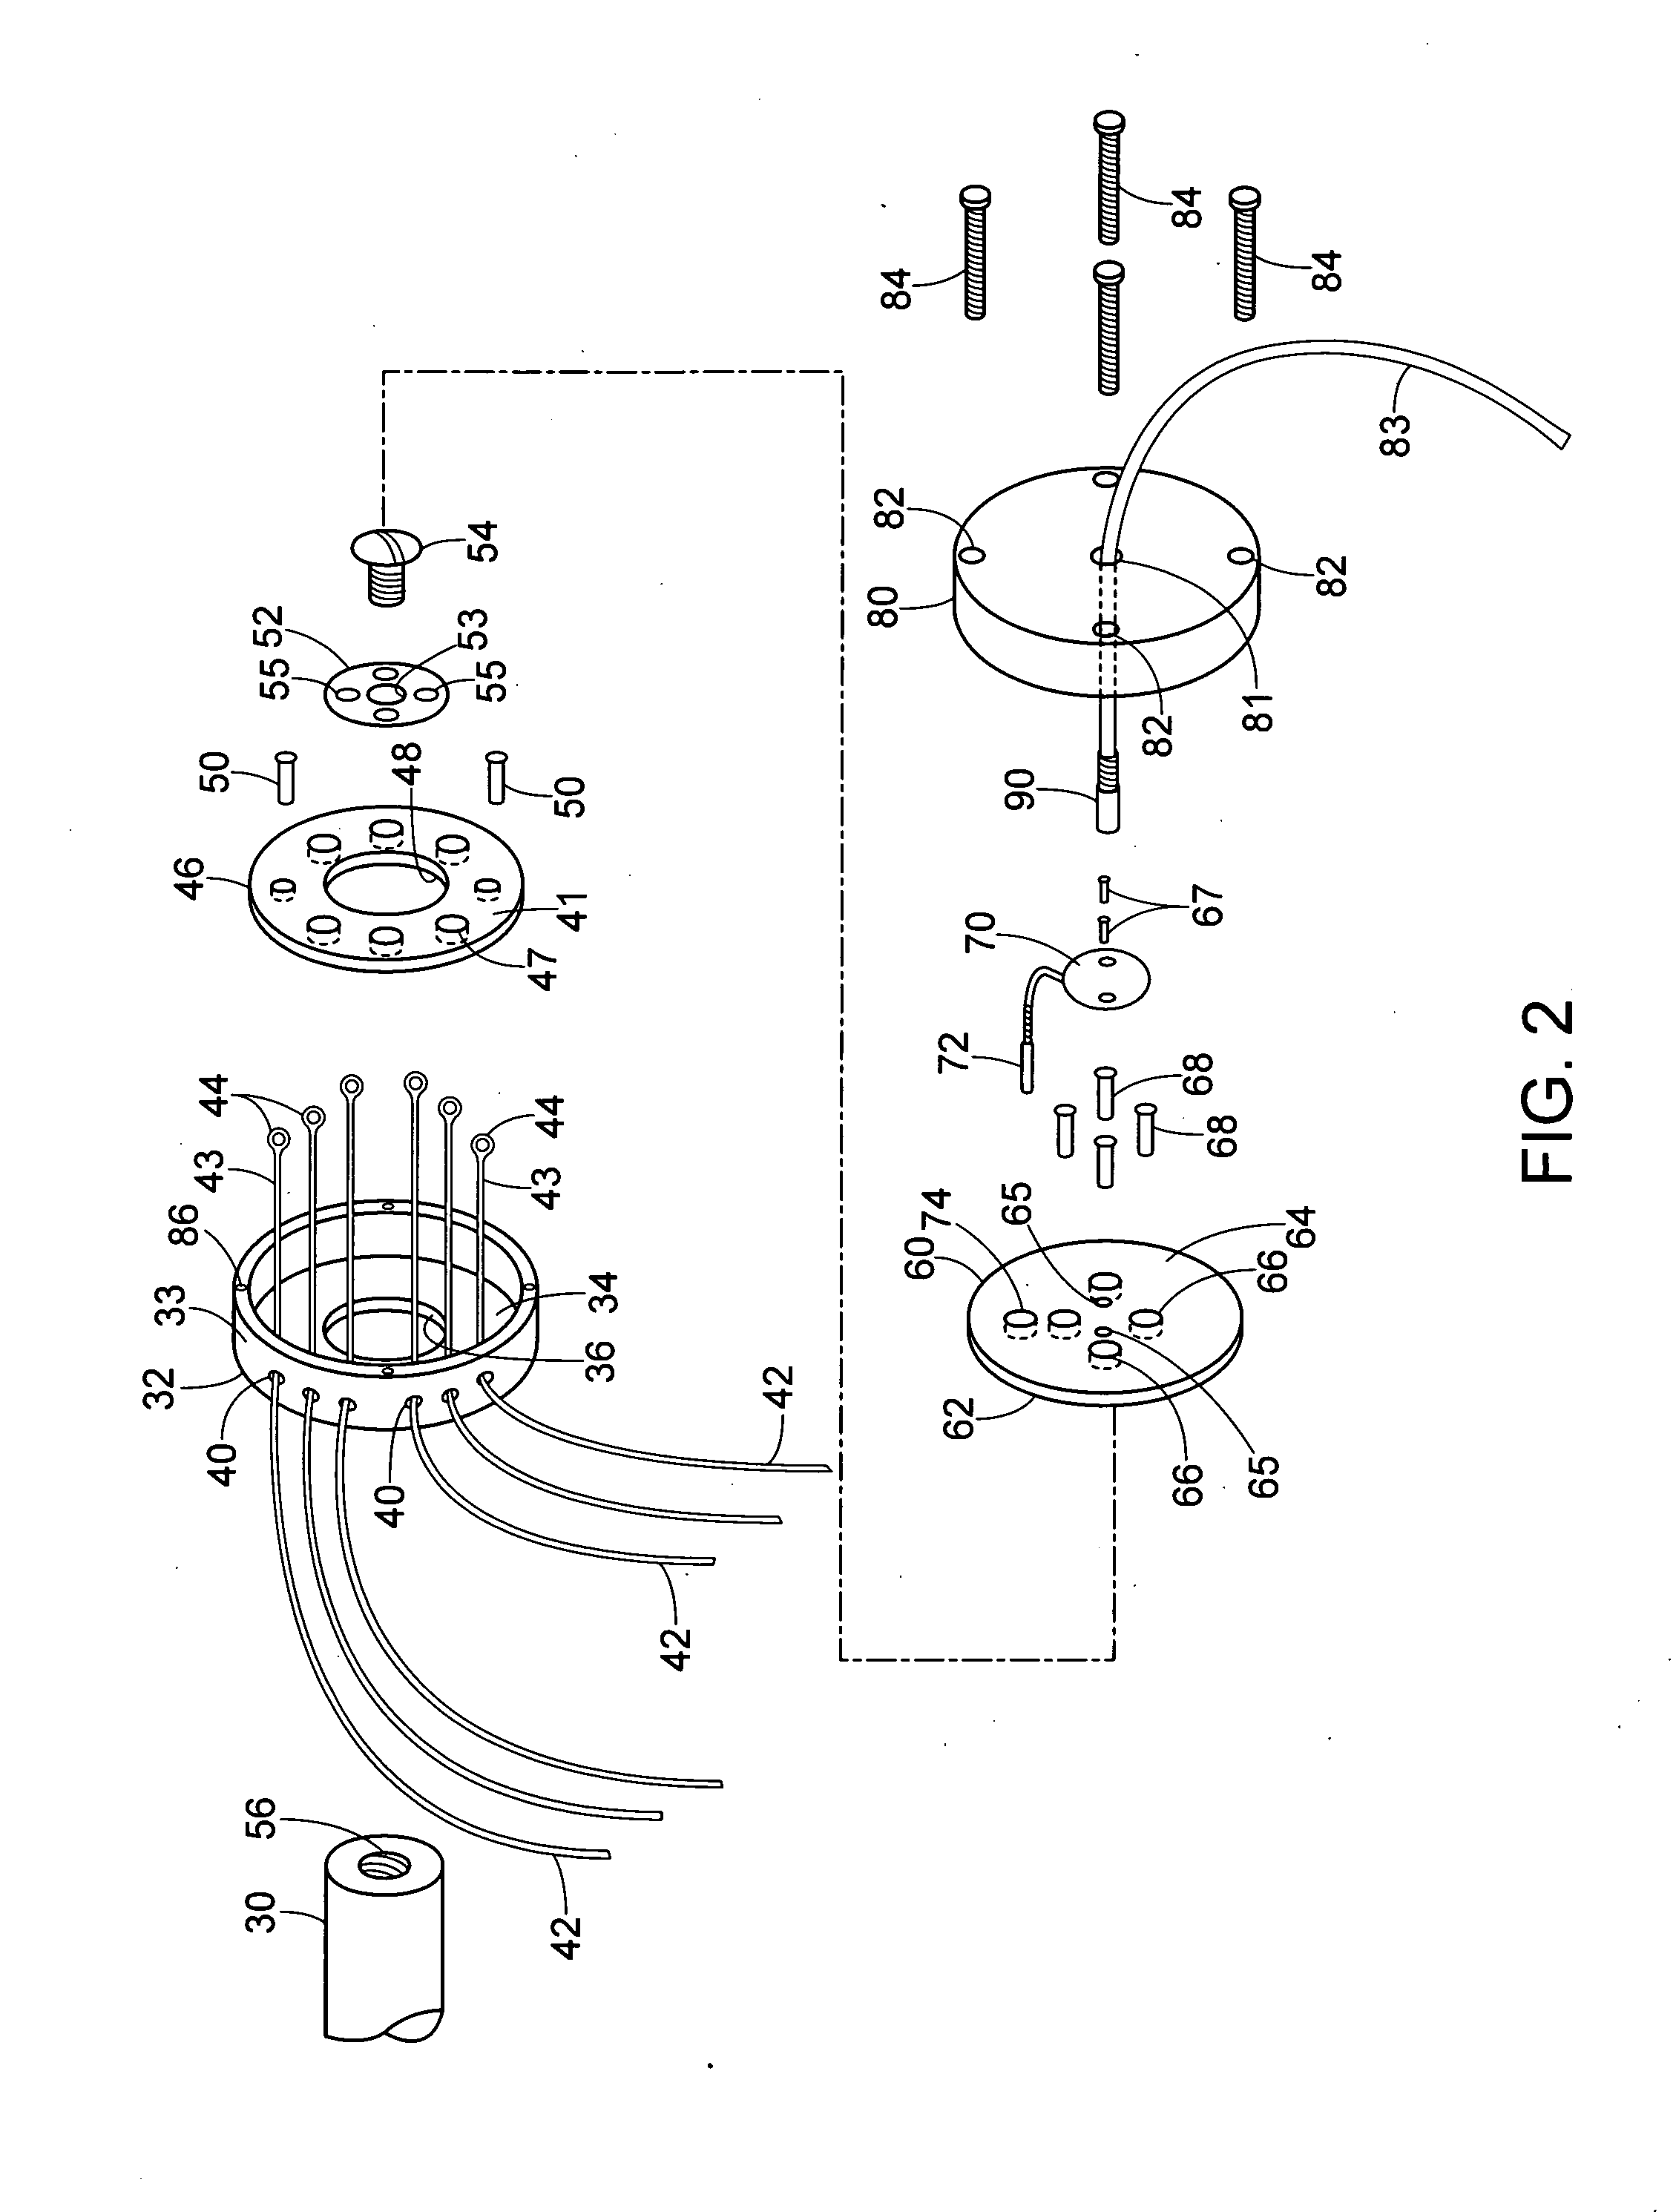 Sequential injection lubrication system for internal combustion engine operating on natural gas or alternative fuels